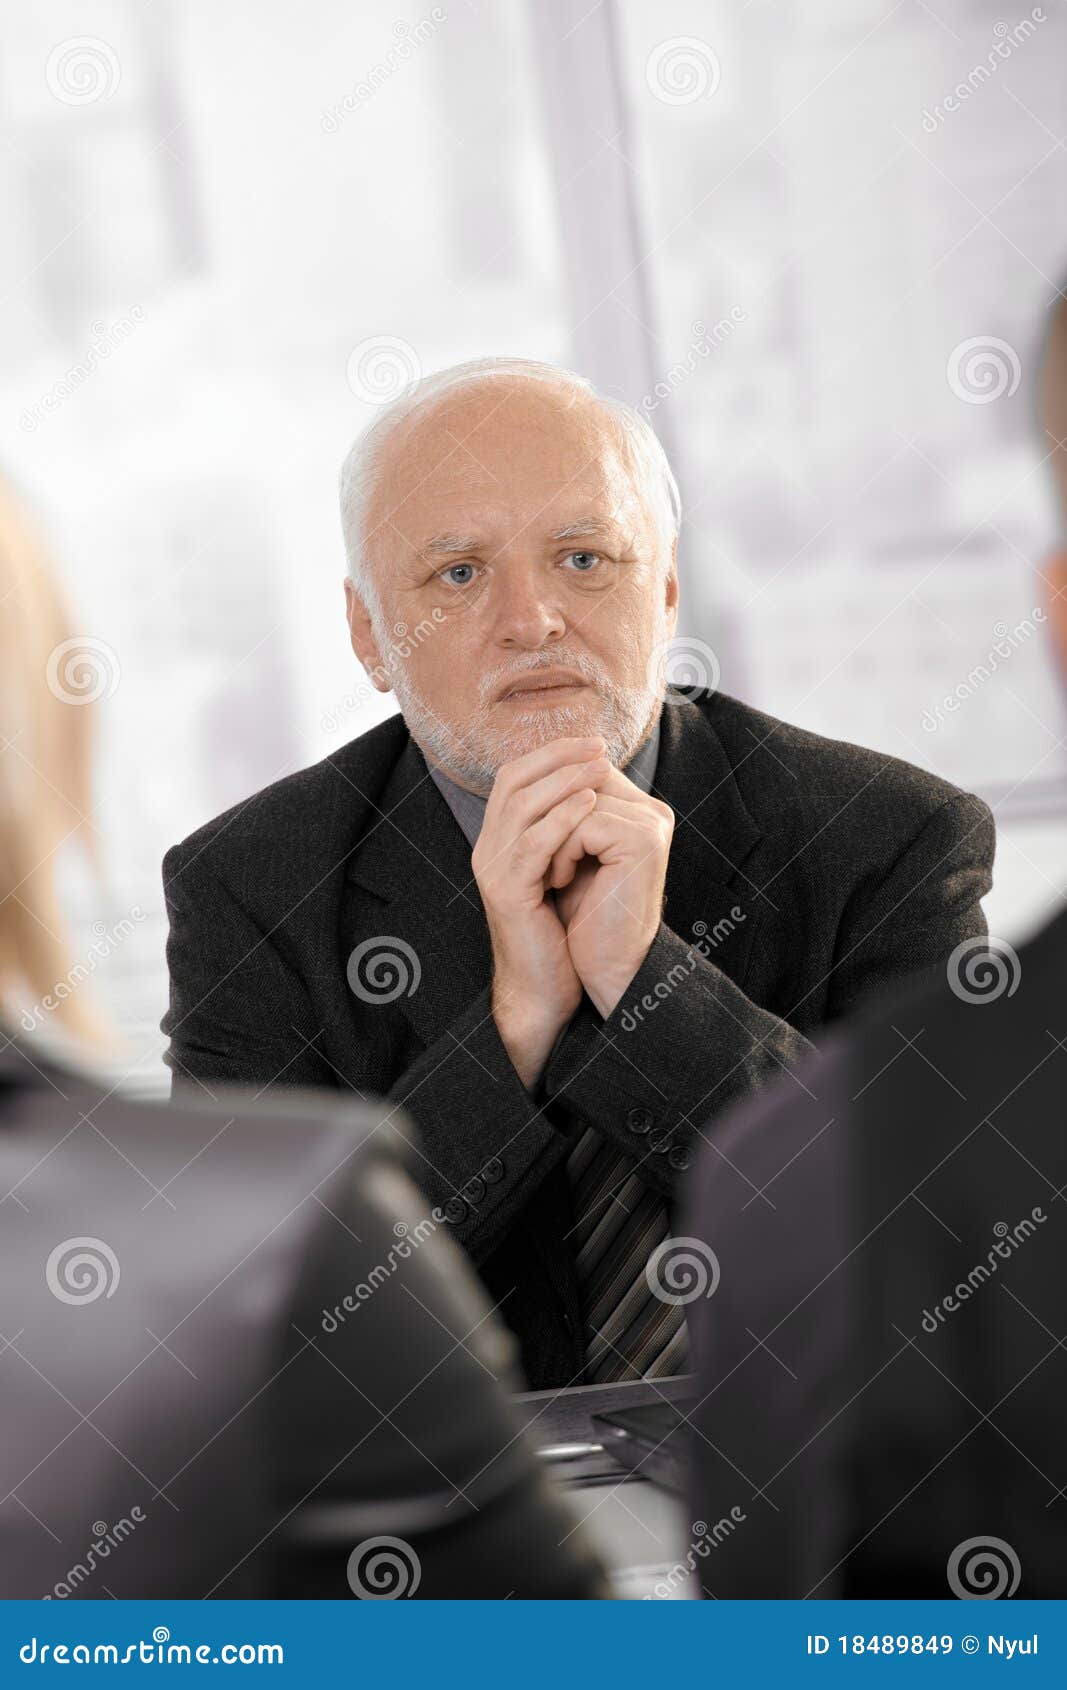 experienced businessman concentrating